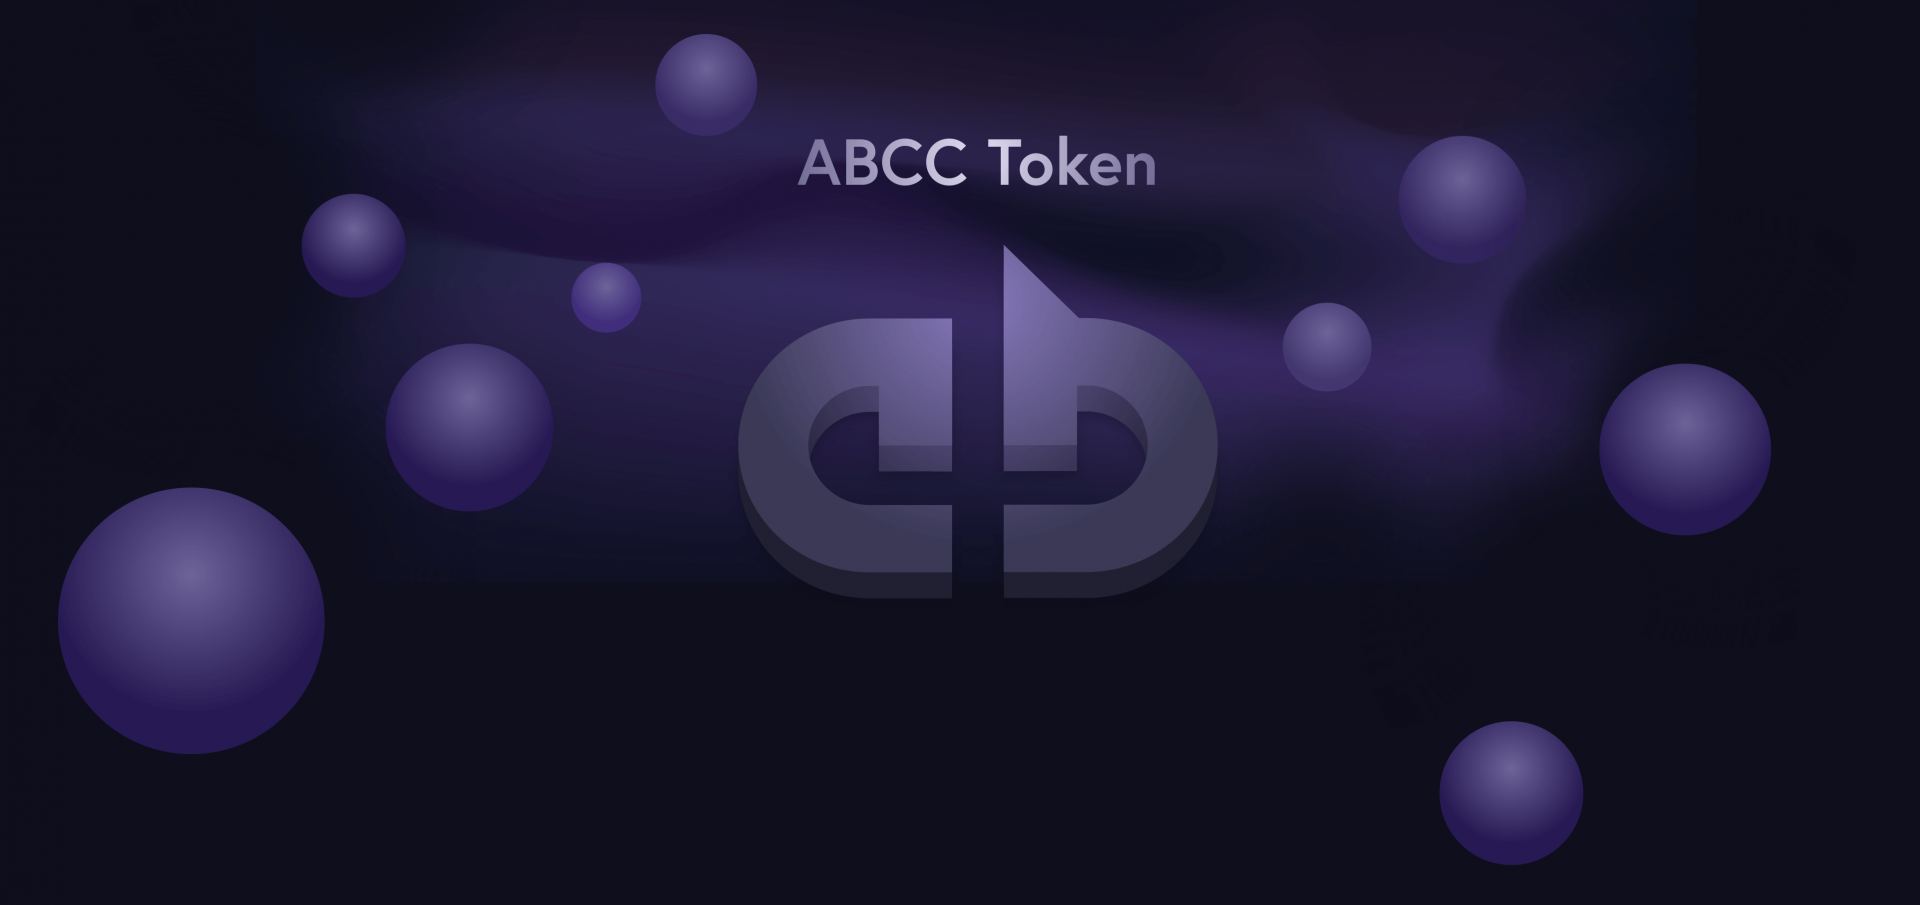 ABCC Token (AT): Its Uniqueness, Value and Approach » NullTX